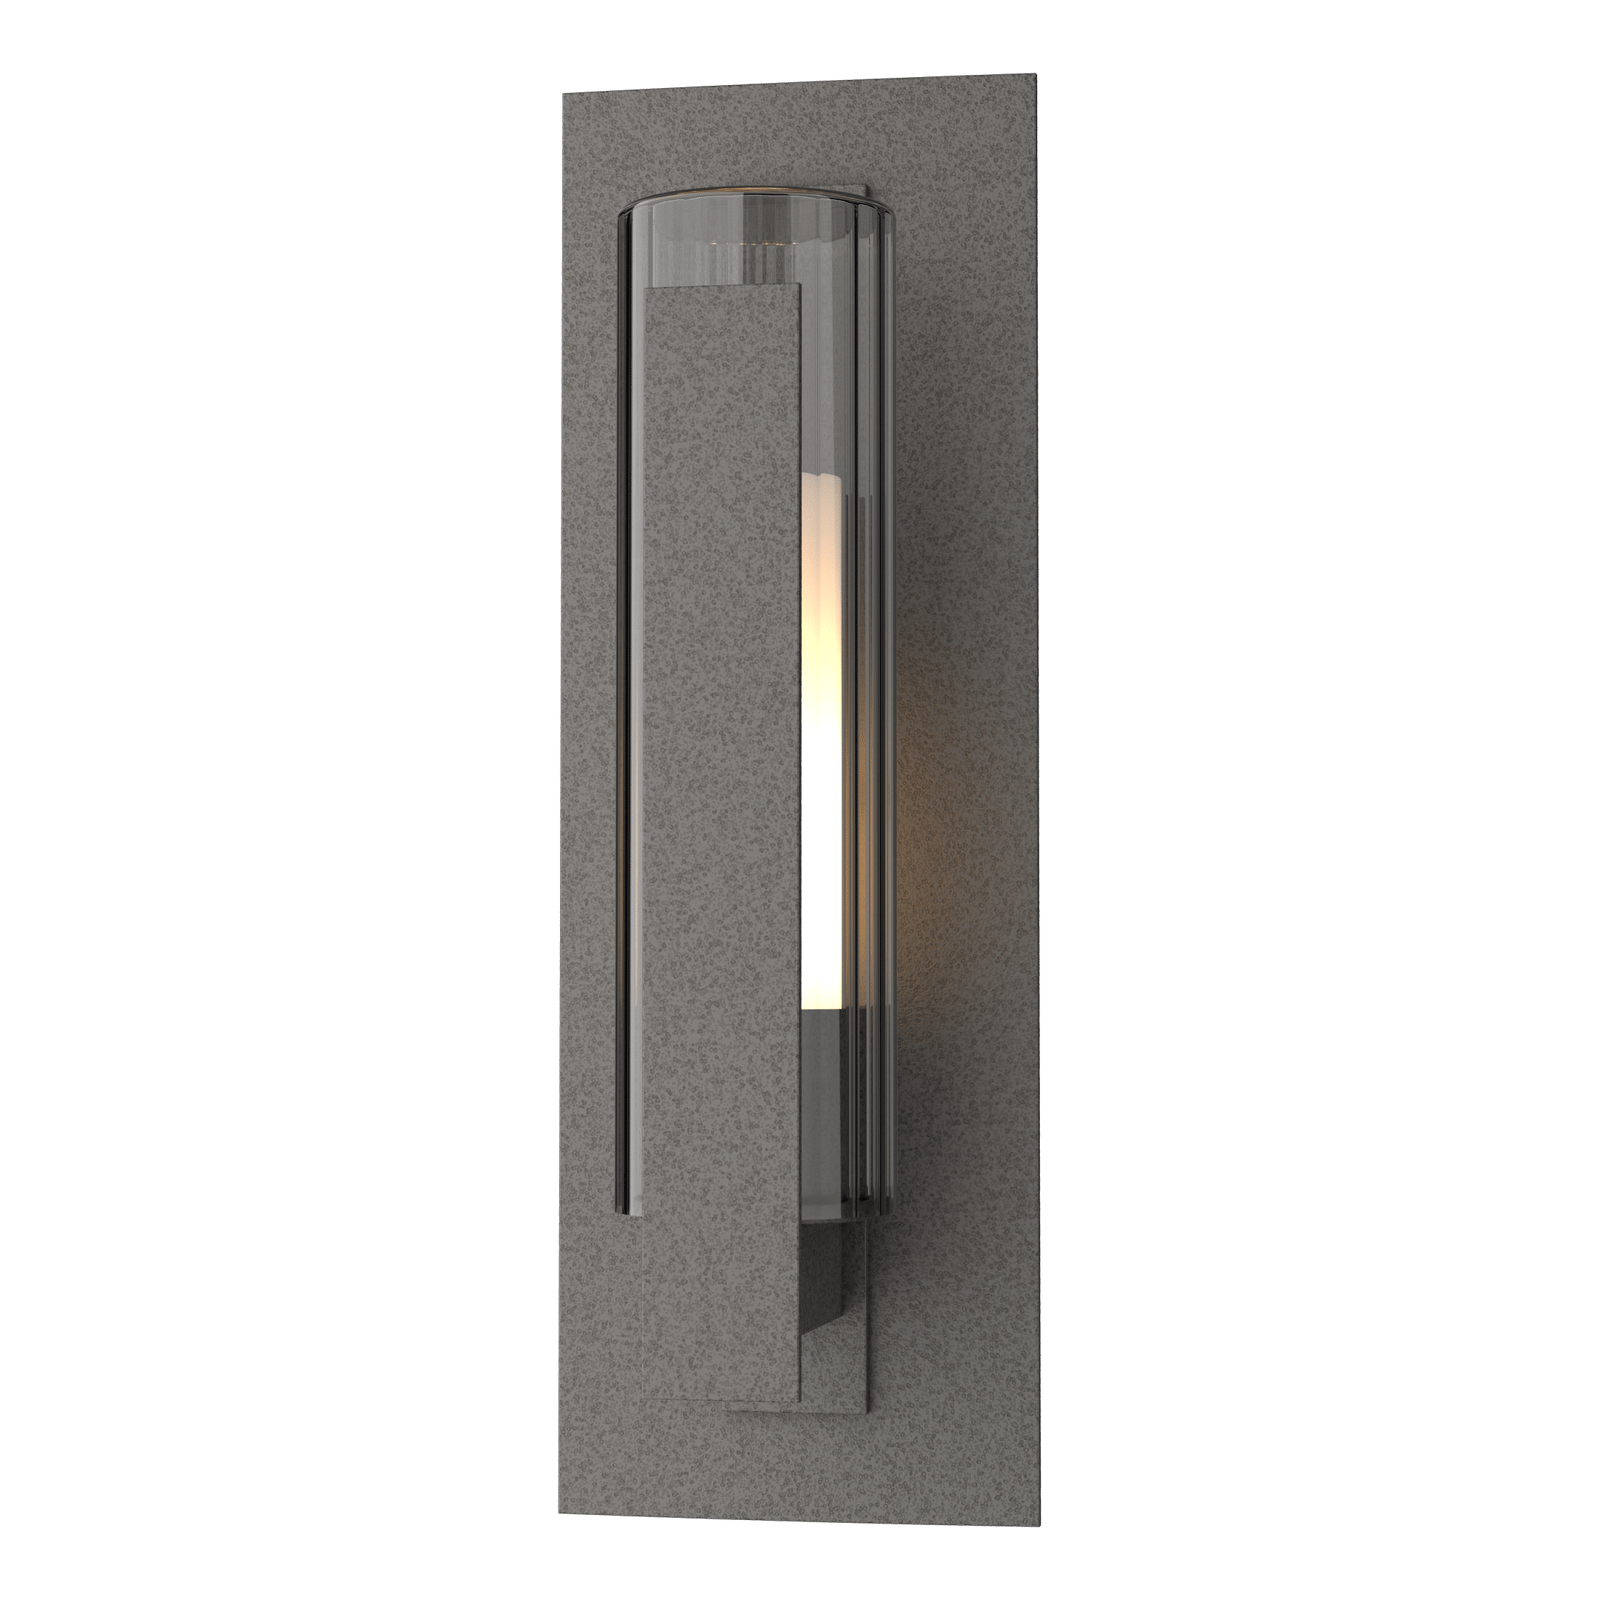 Hubbardton Forge Vertical Bar Fluted Glass Small Outdoor Sconce Outdoor l Wall Hubbardton Forge Coastal Natural Iron Clear Glass with Opal Diffuser (ZU) 